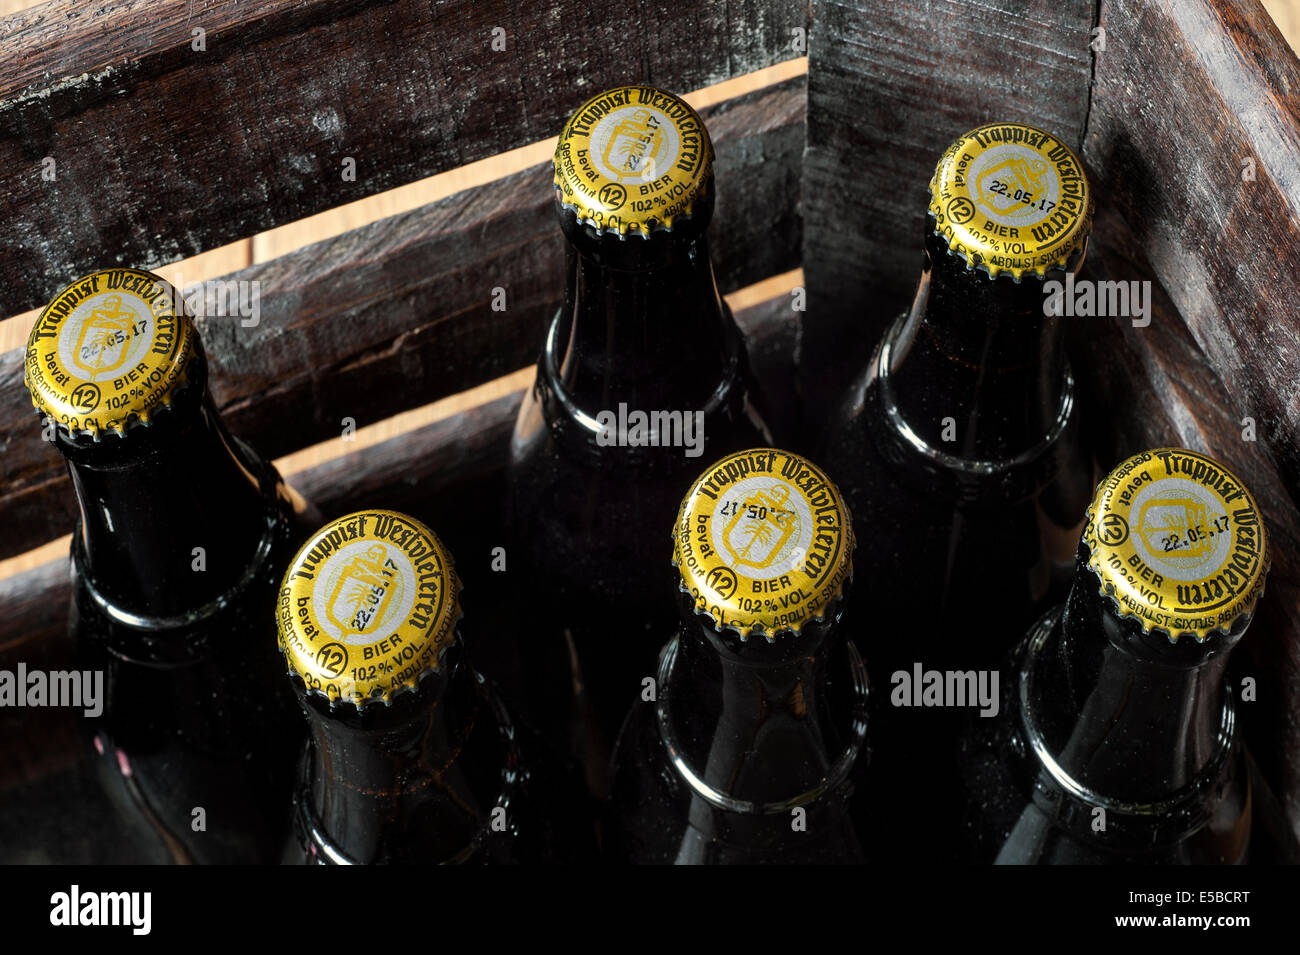 Wooden crate with Trappist Westvleteren 12° / 10.2% bottles, best beer in the world, brewed in the Saint Sixtus Abbey, Belgium Stock Photo